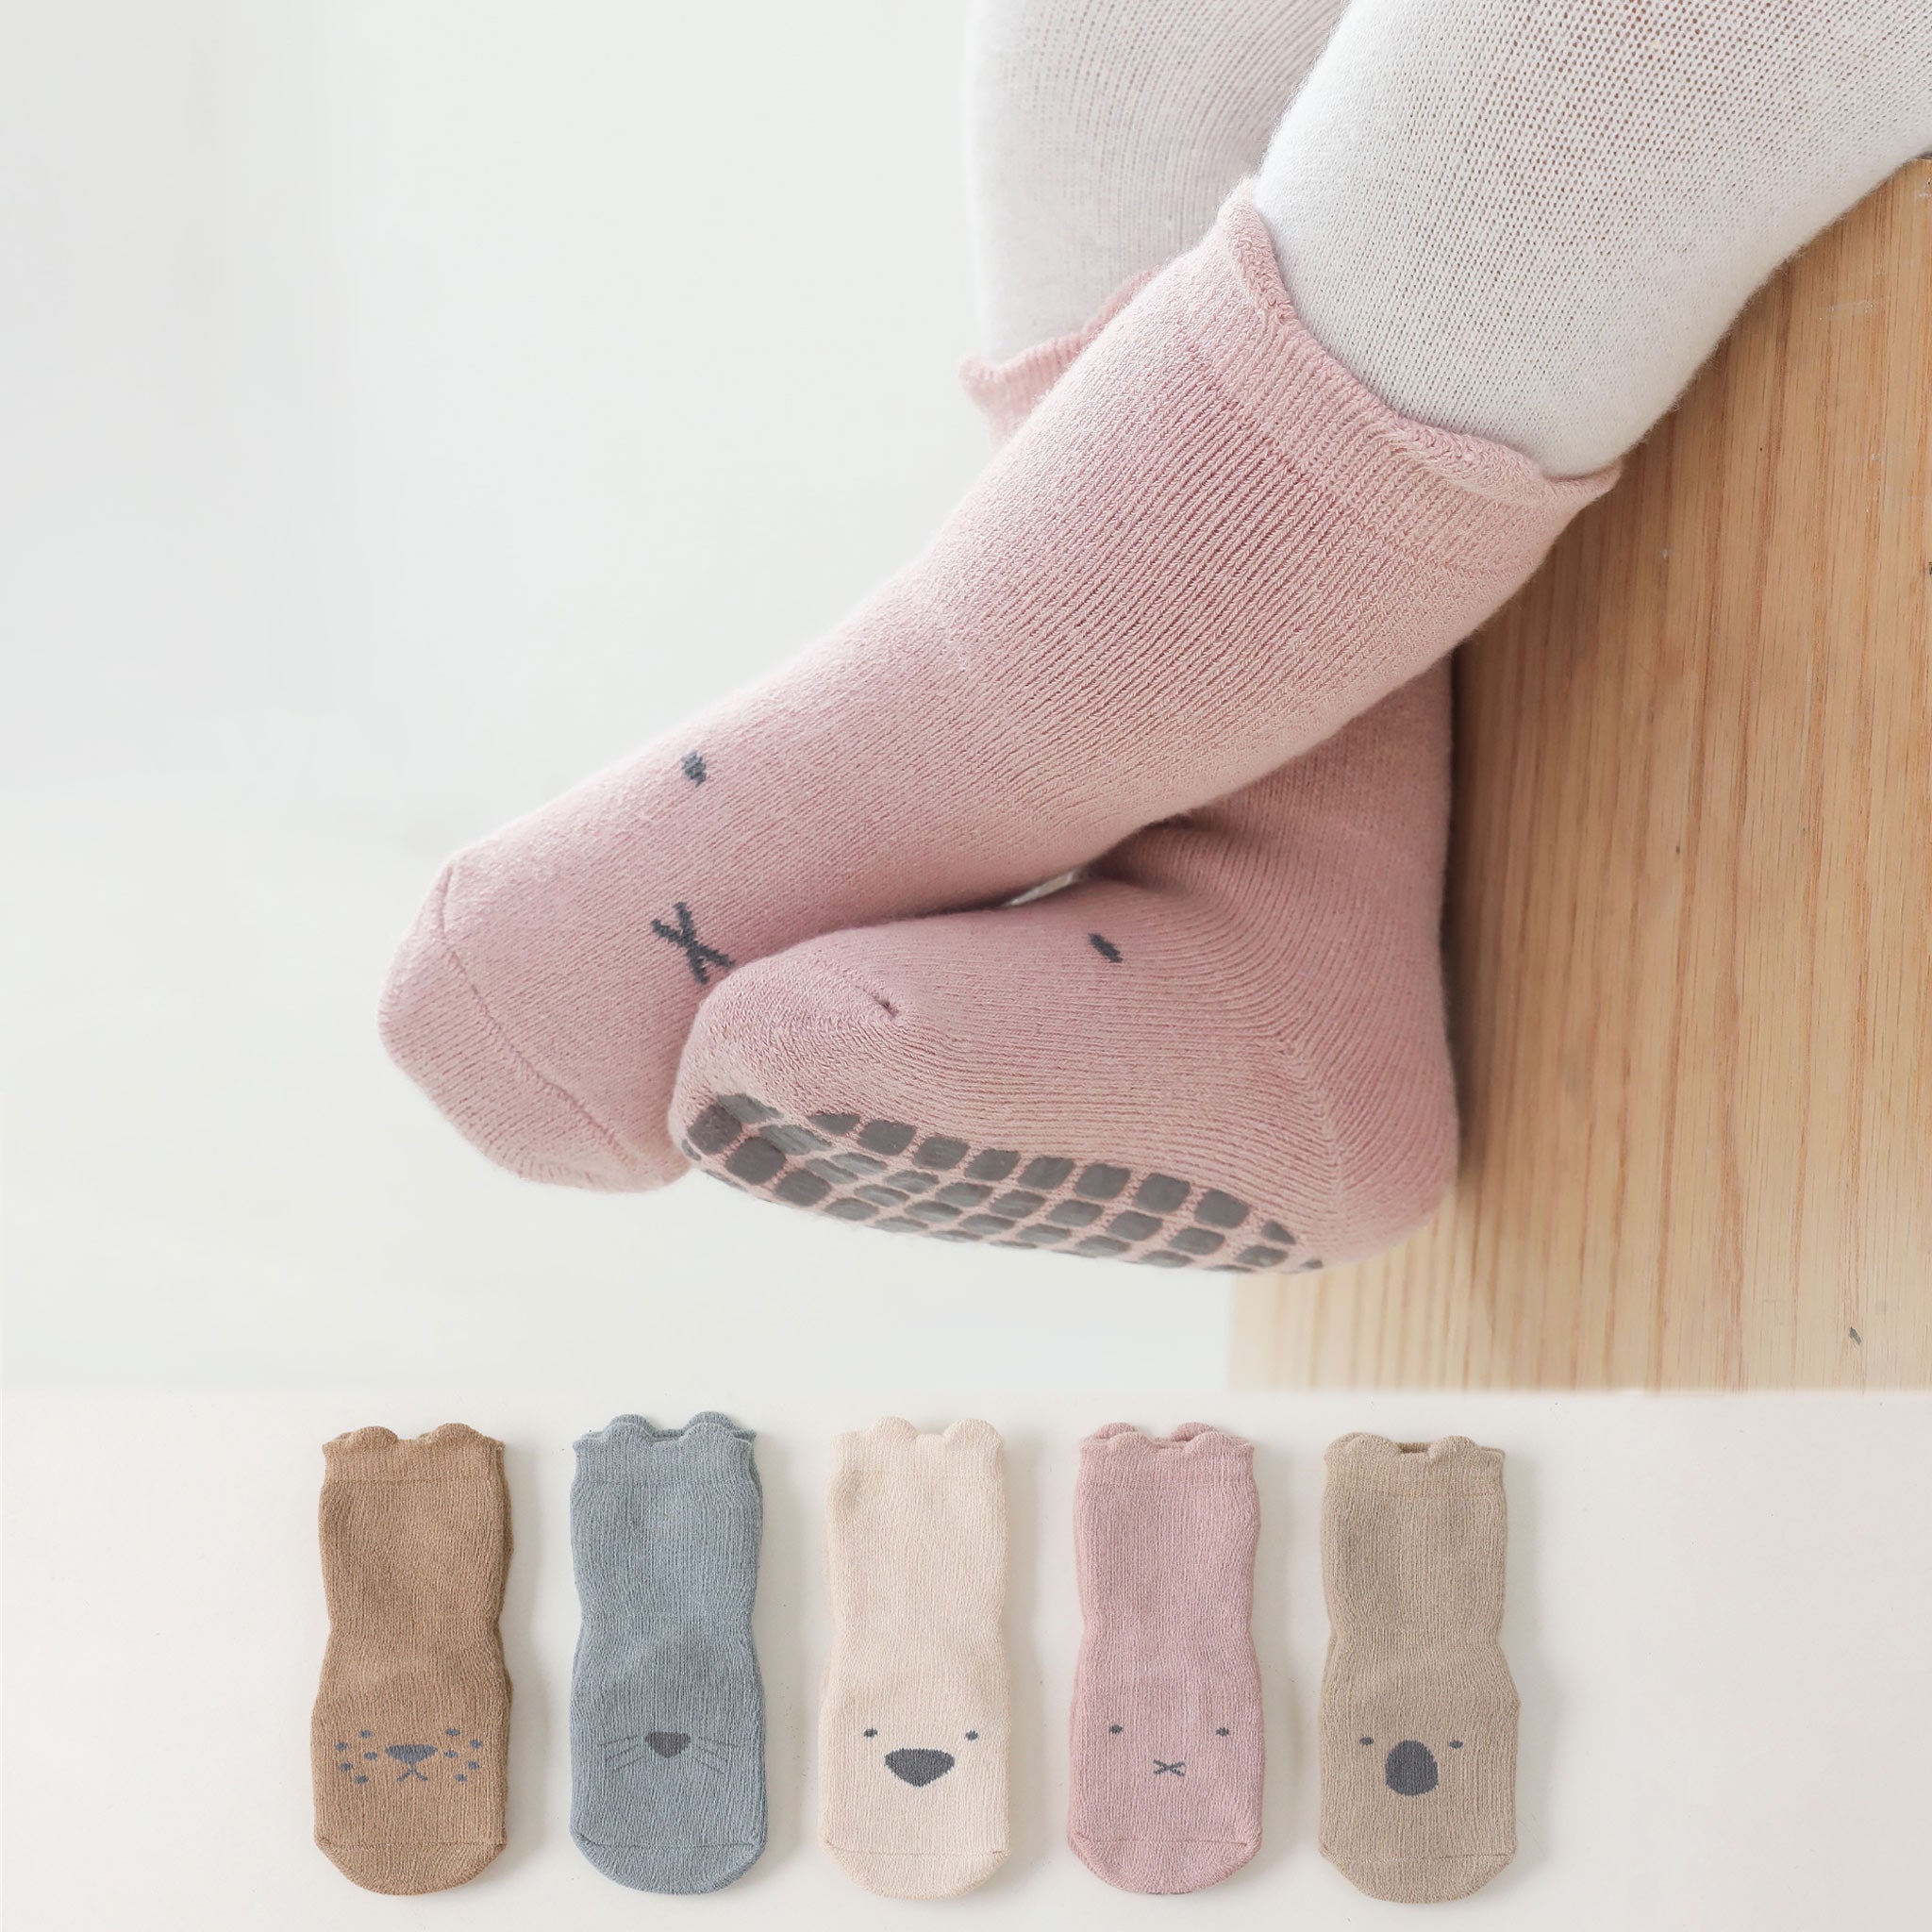 Here's 10% OFF Into The Wild - 4 Pairs, friend - Little Yoga Socks